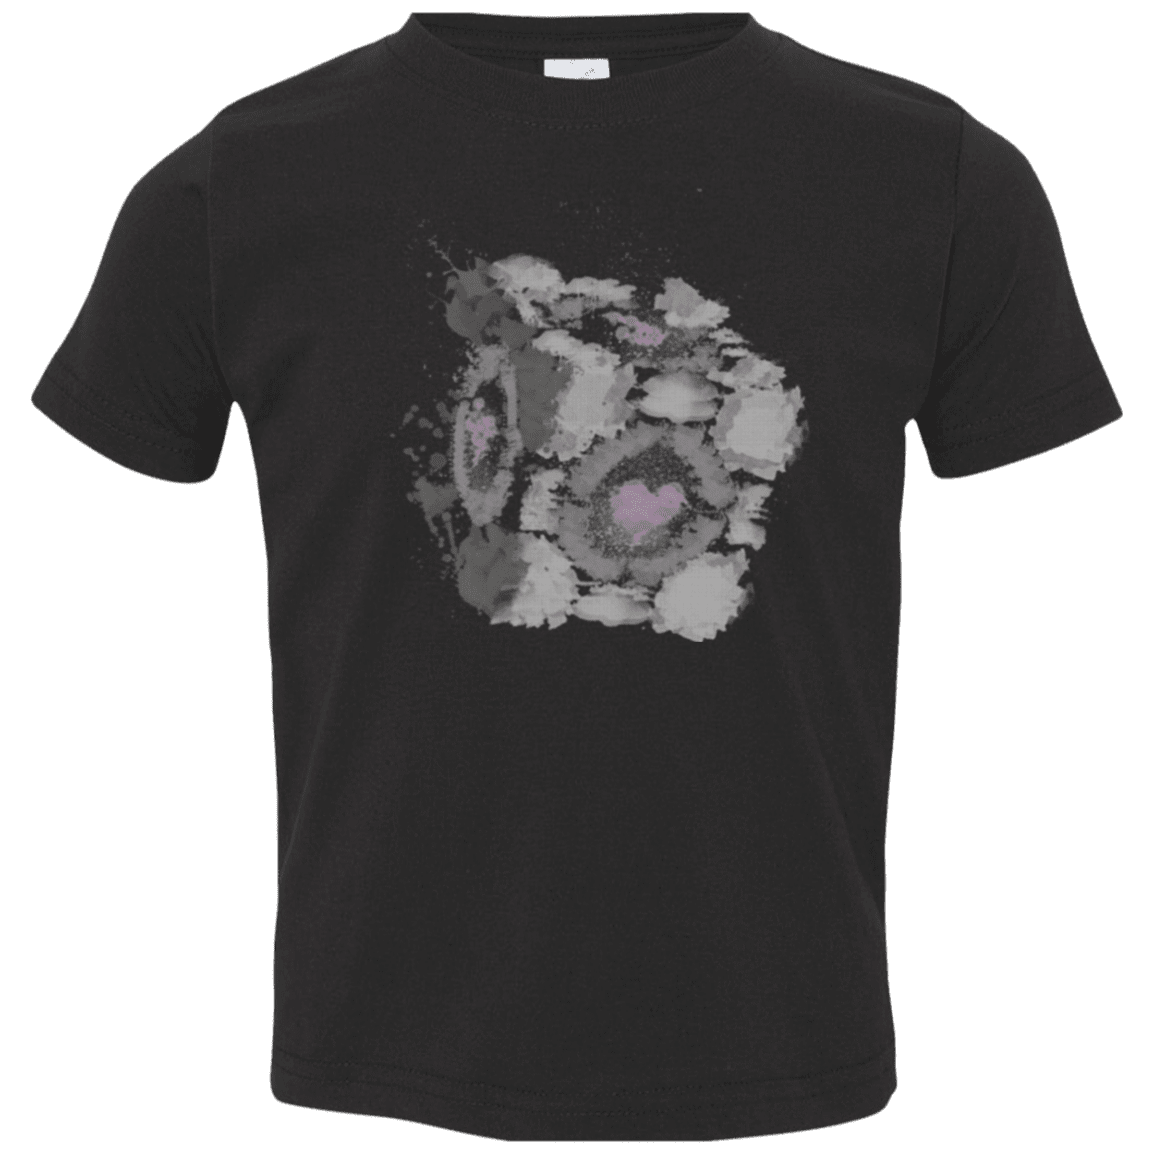 T-Shirts Black / 2T Abstract Cube Toddler Premium T-Shirt